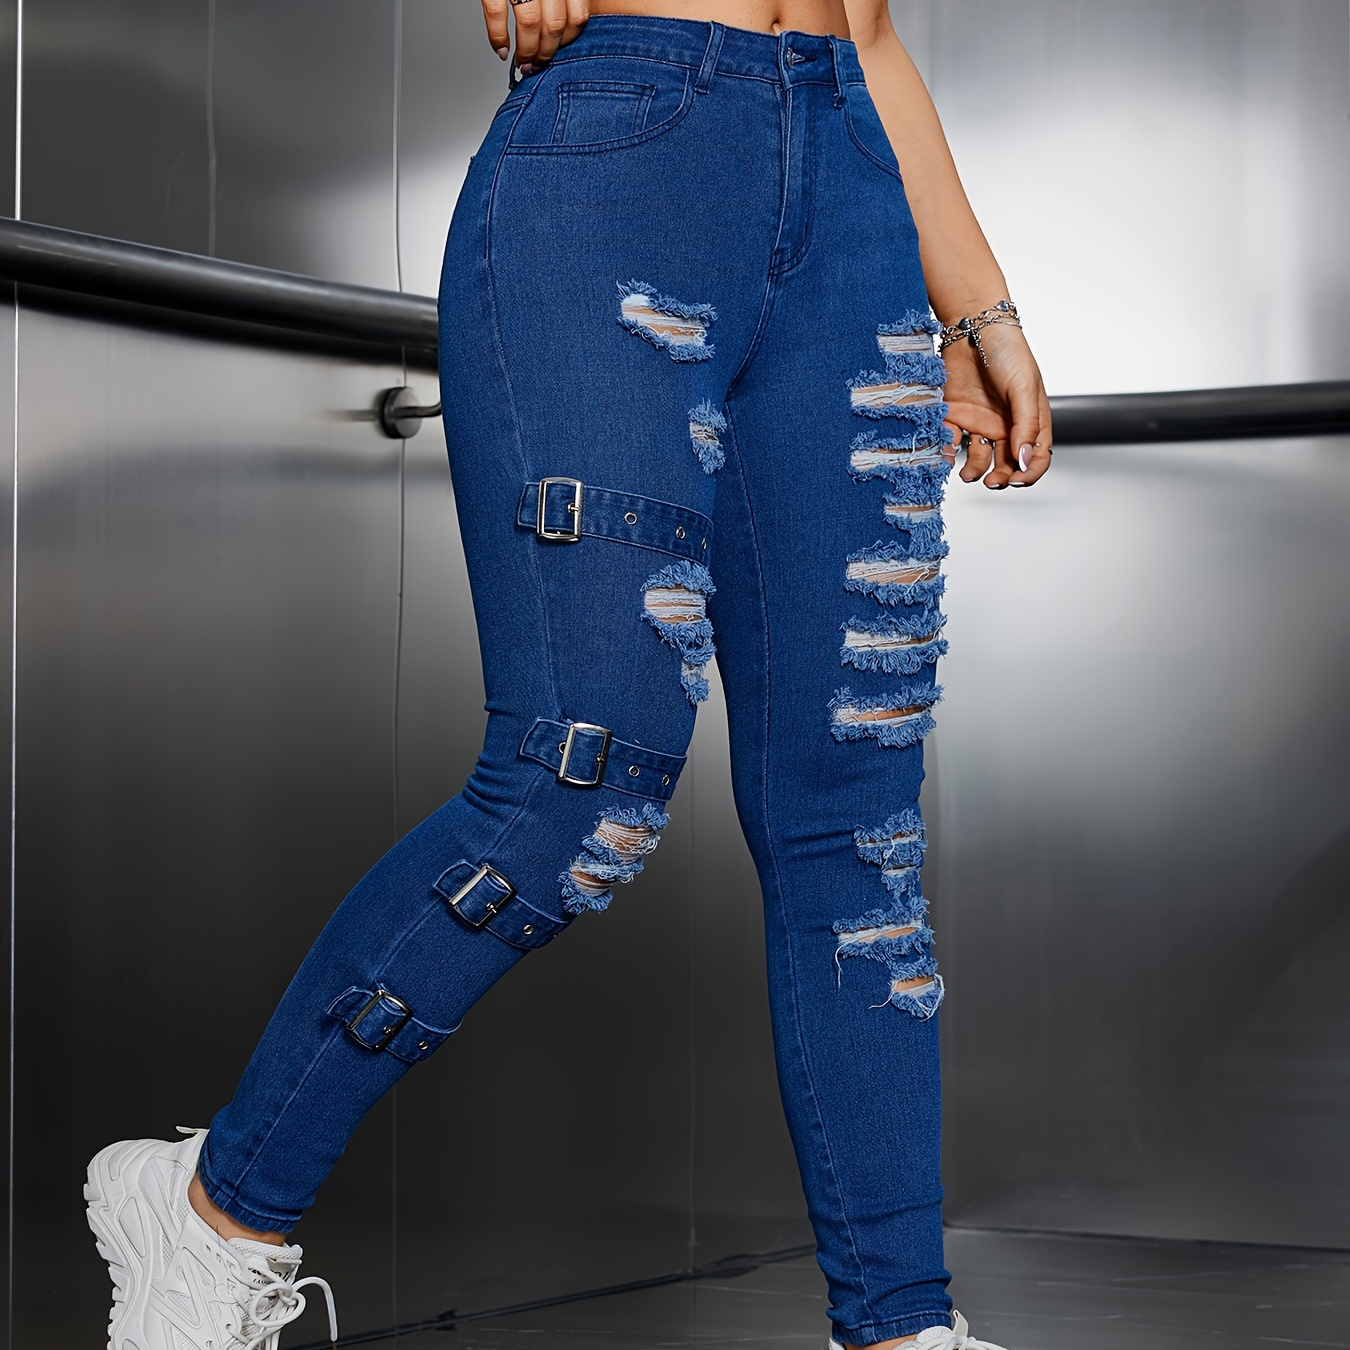 

Women's Street Style High-waist Stretchy Skinny Jeans With Ripped Detailing And Adjustable Buckle, Fashionable Denim Long Pants